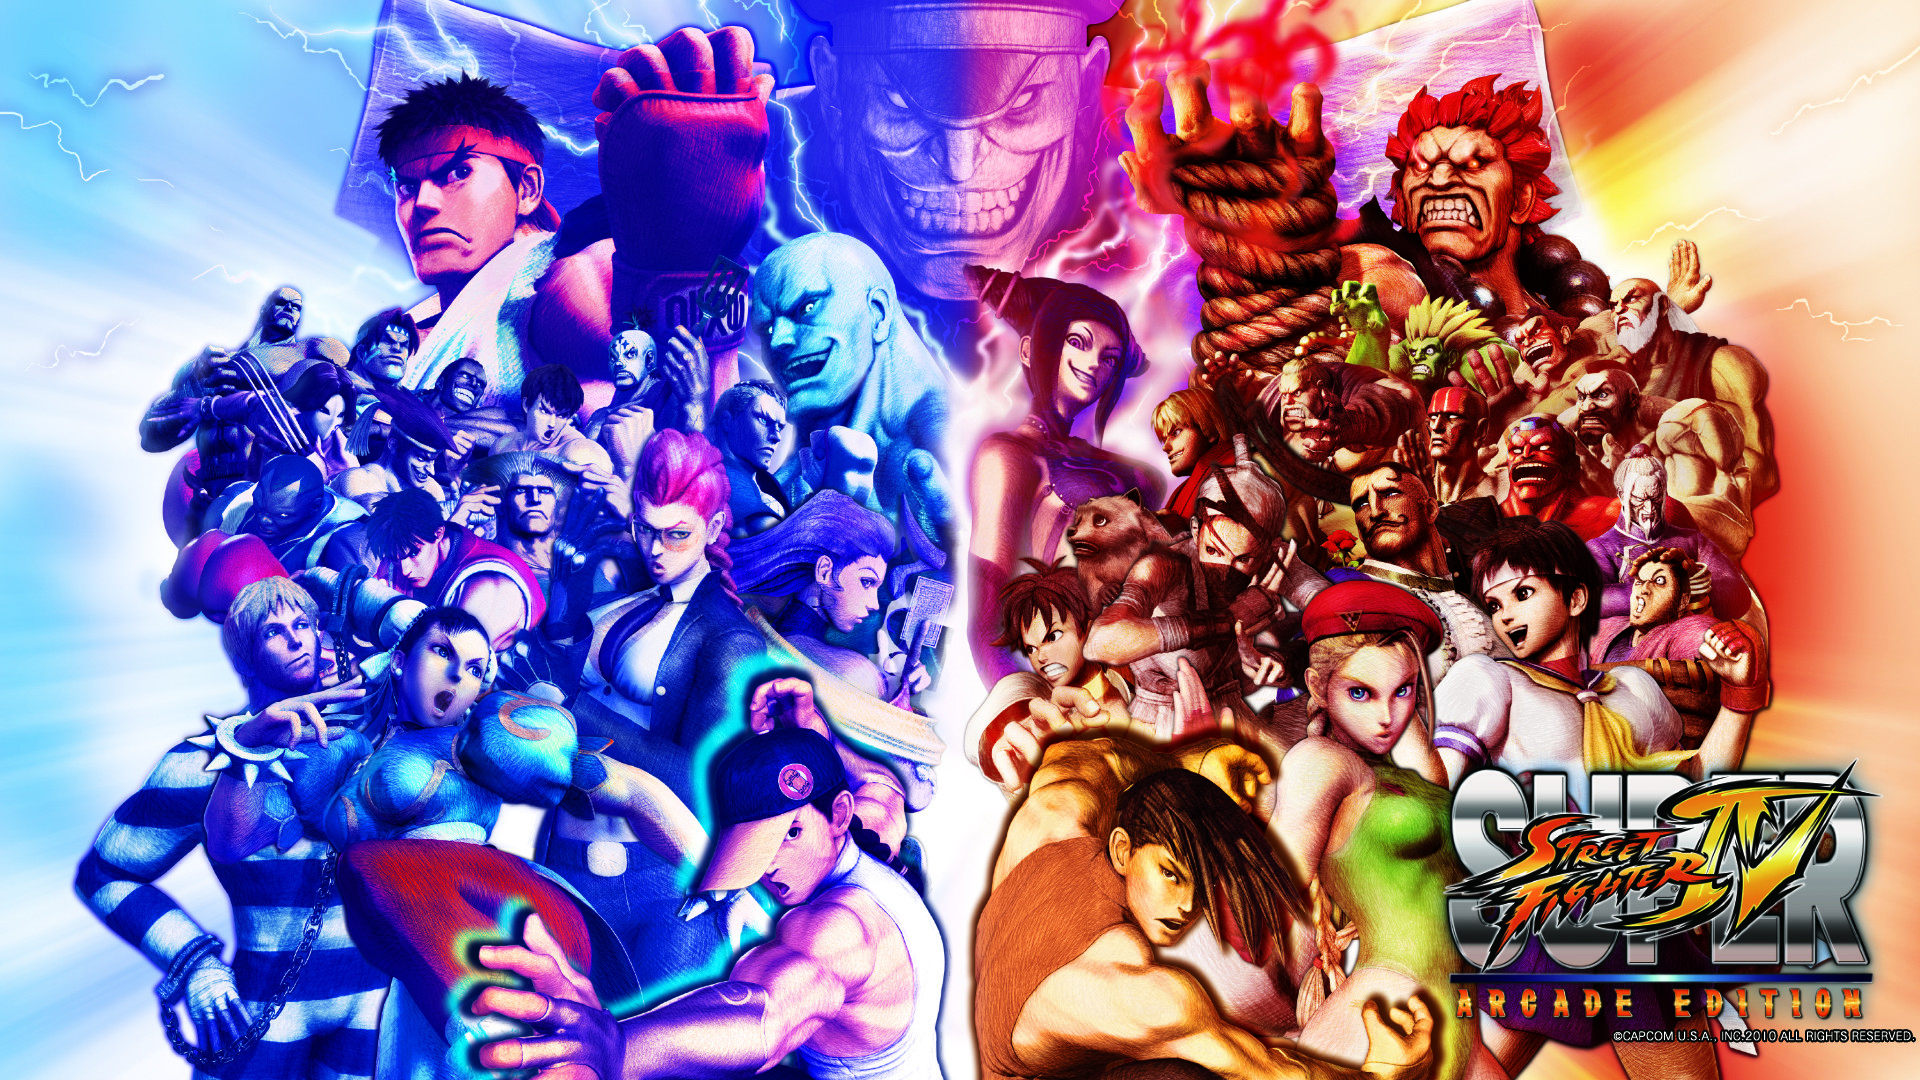 1920x1080 Search Results for “street fighter wallpaper personagens” – Adorable  Wallpapers